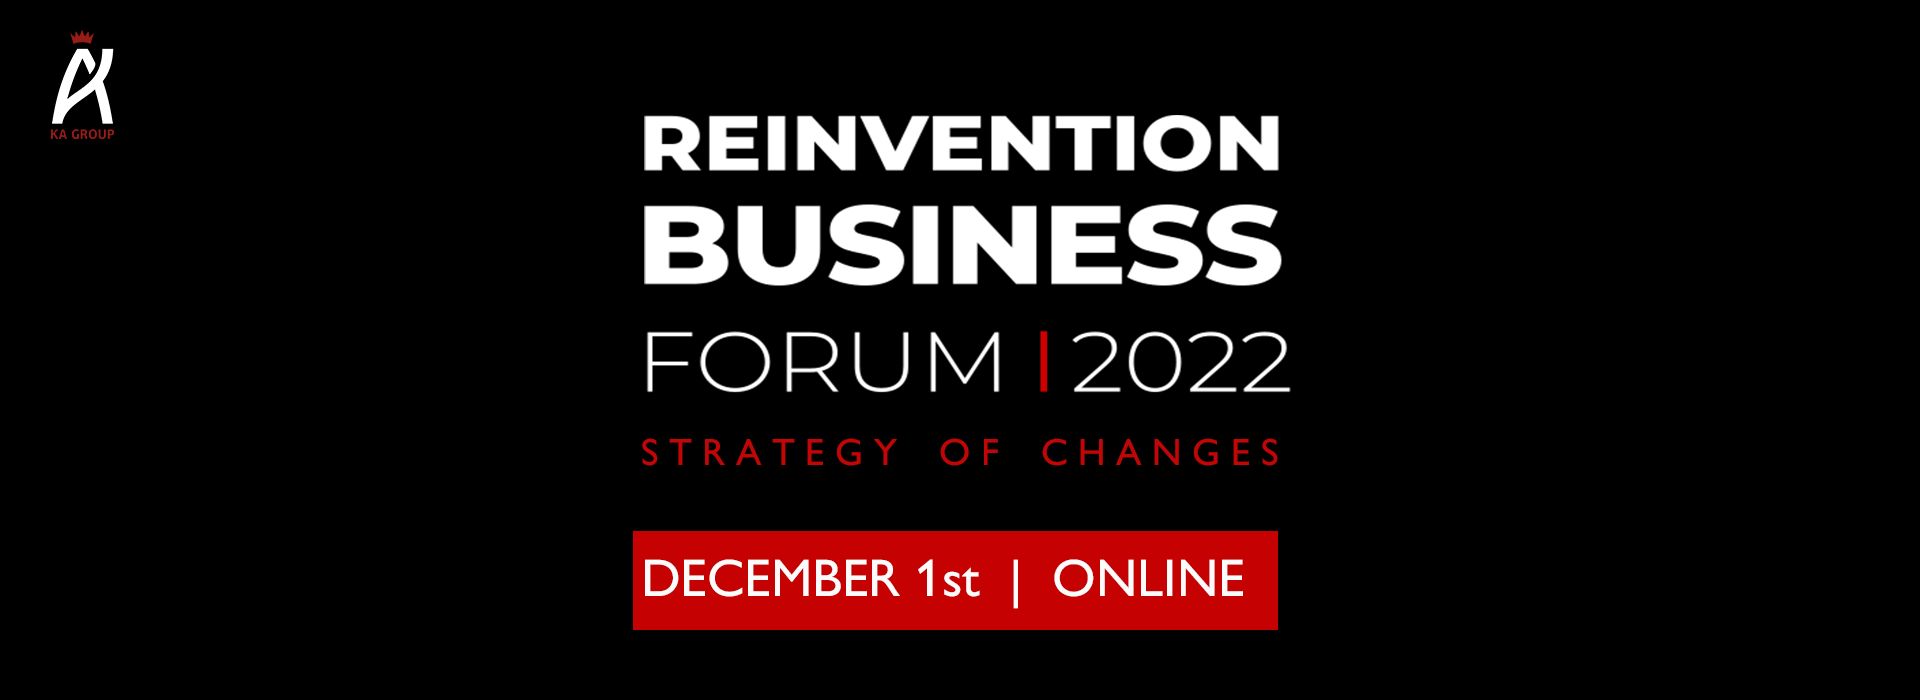 Reinvention Business Forum: Strategy of Changes